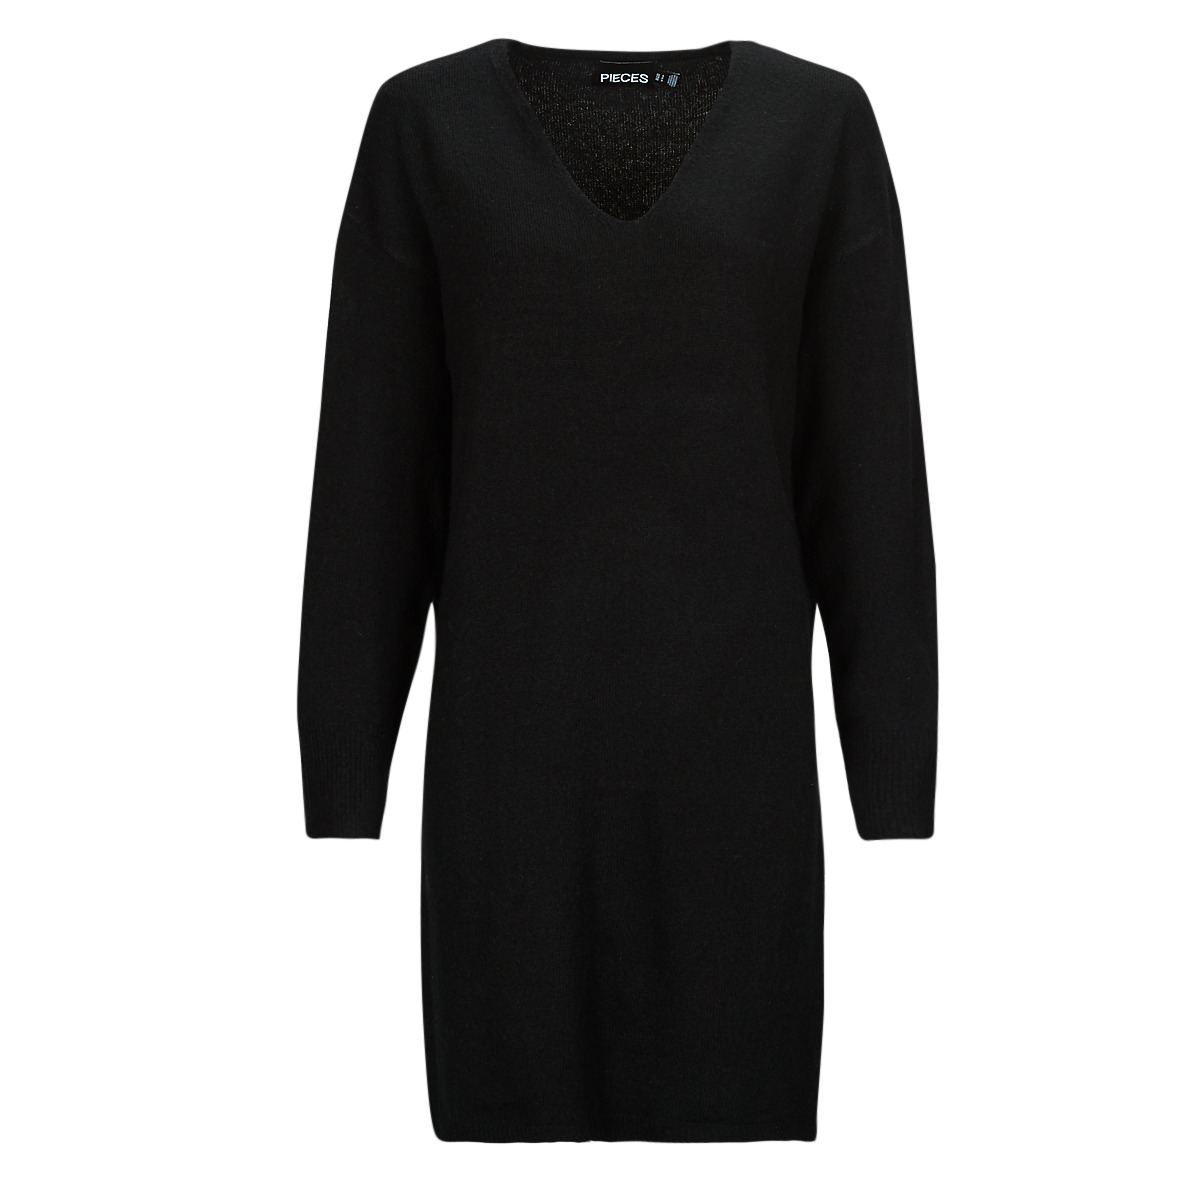 BC Women V-NECK - delivery NET - Free DRESS Black LS | NOOS ! Short Pieces PCJULIANA KNIT Spartoo Dresses Clothing